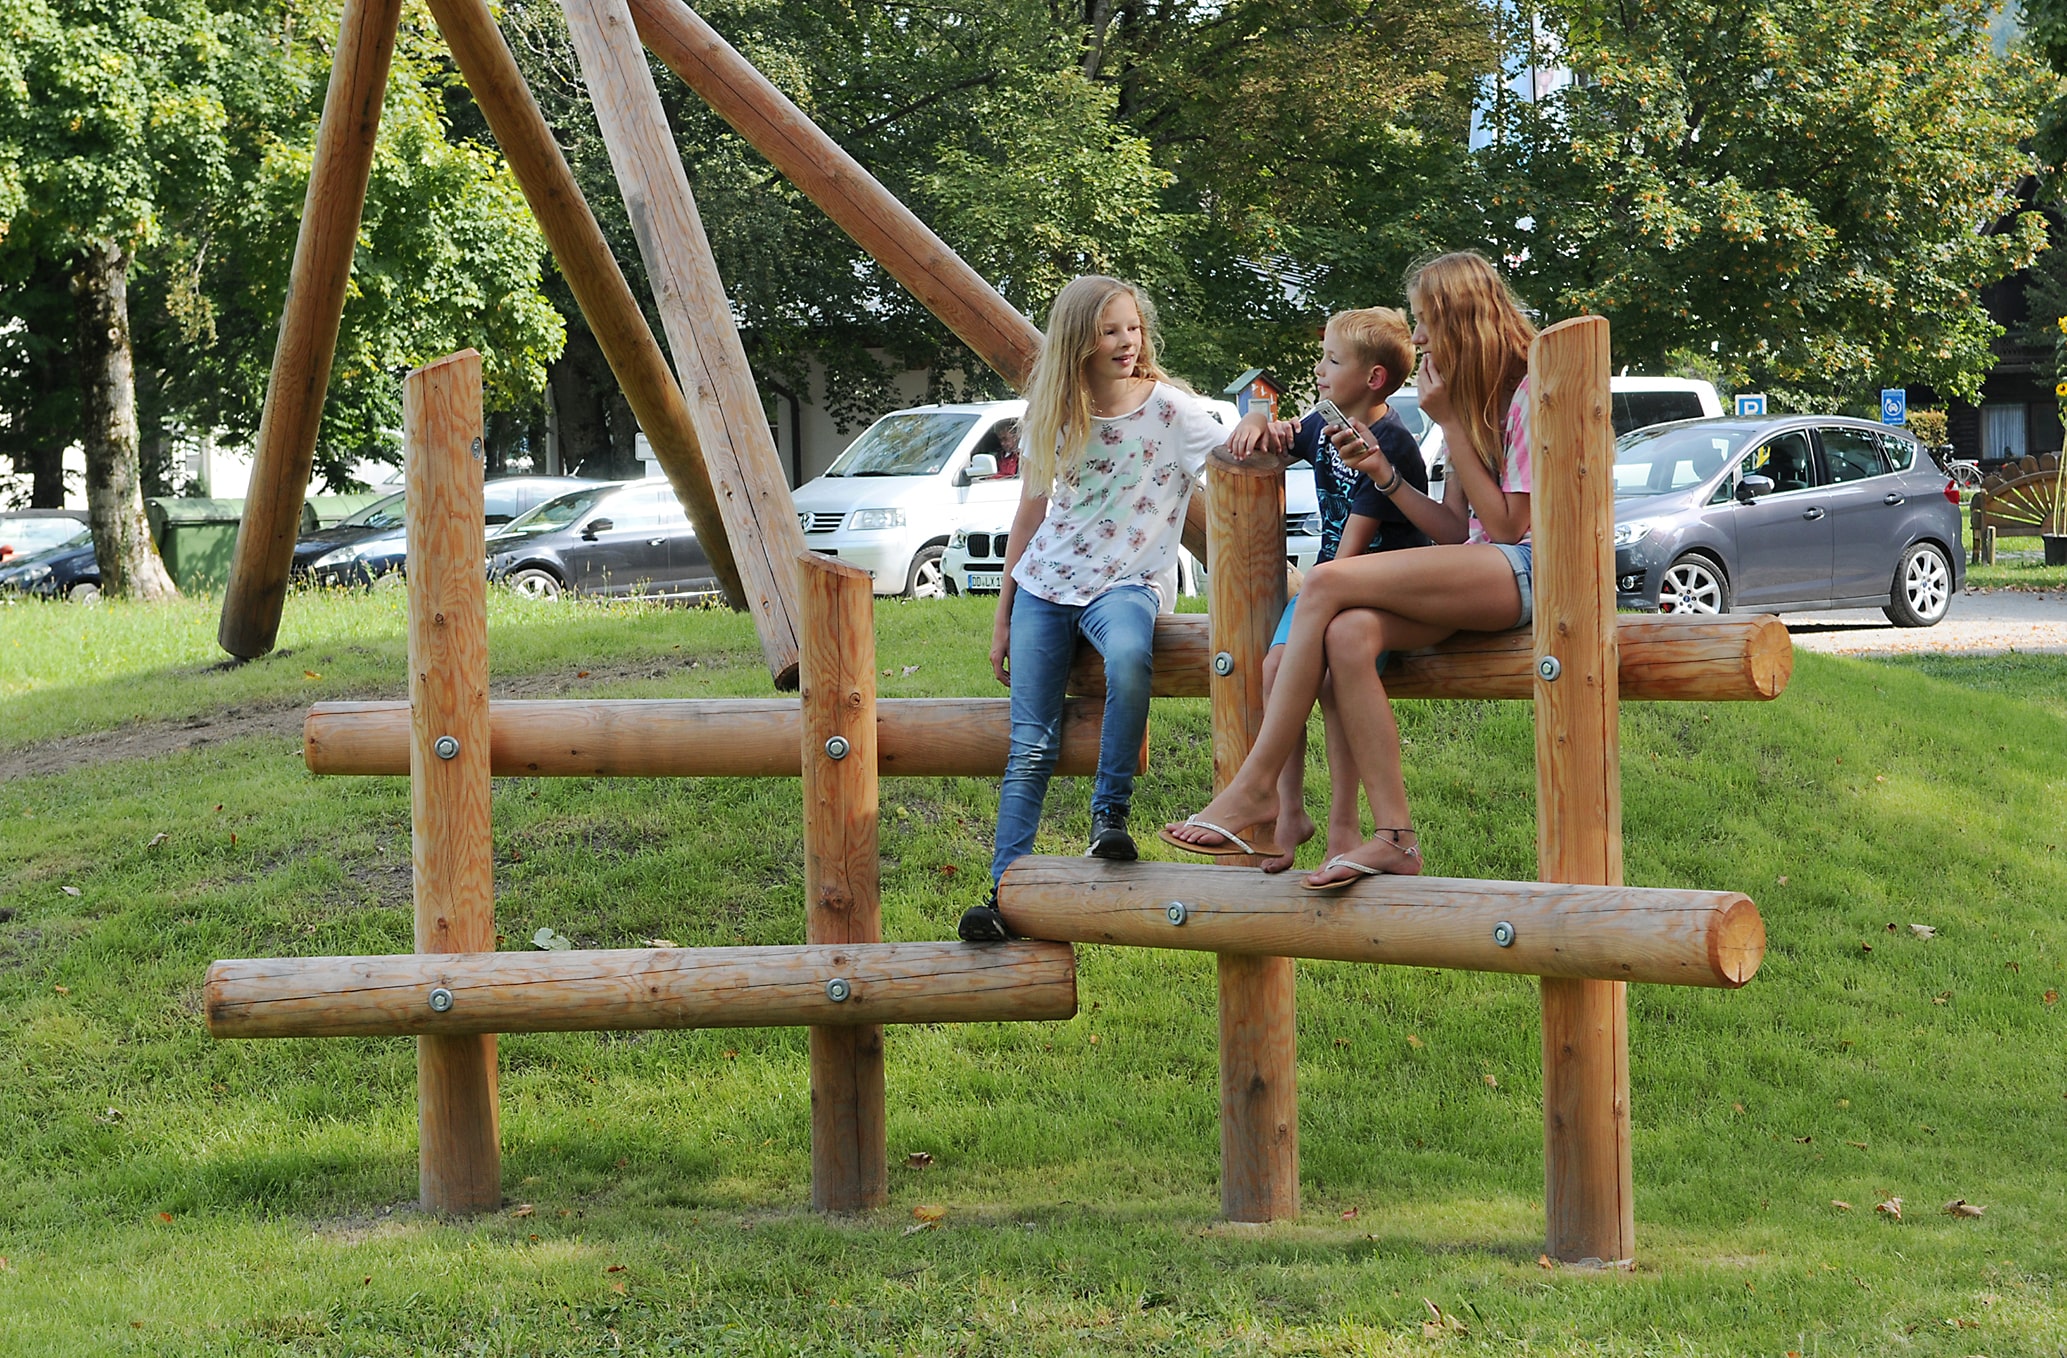 Ideal for seating within any playground the Sitting Fence is playful and great for girls to socialise on